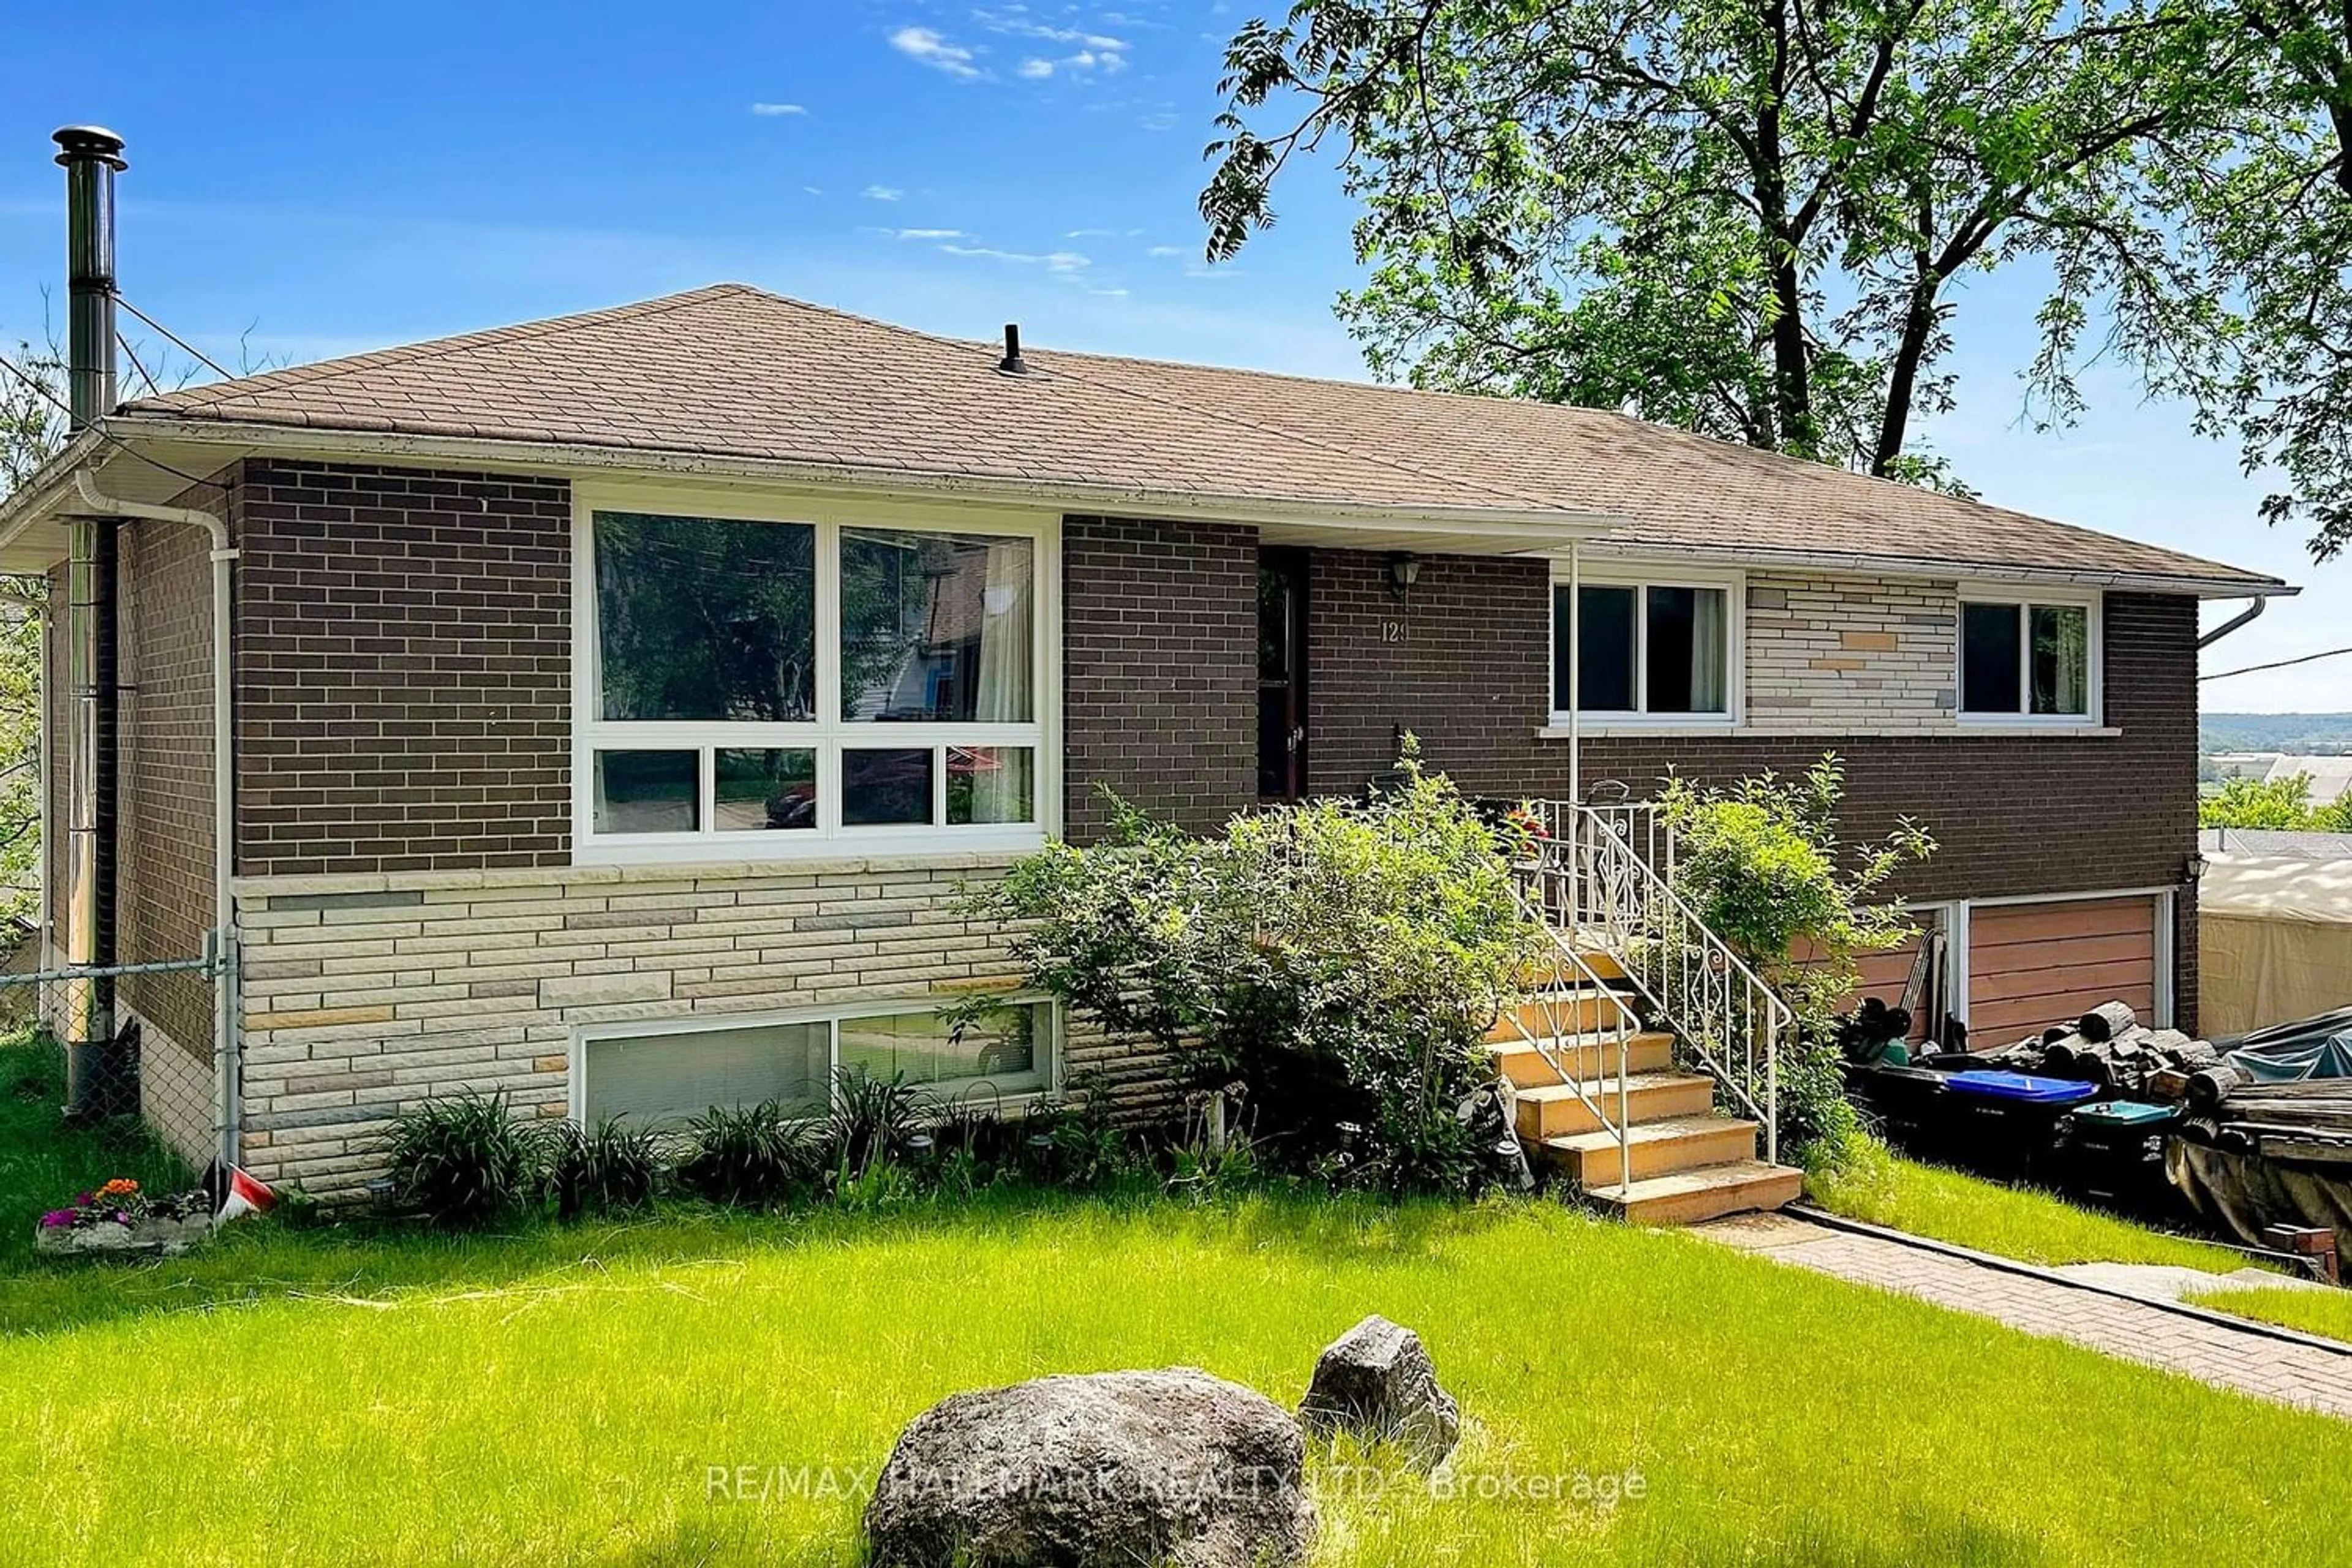 Home with brick exterior material for 129 Moore St, Bradford West Gwillimbury Ontario L3Z 2B8